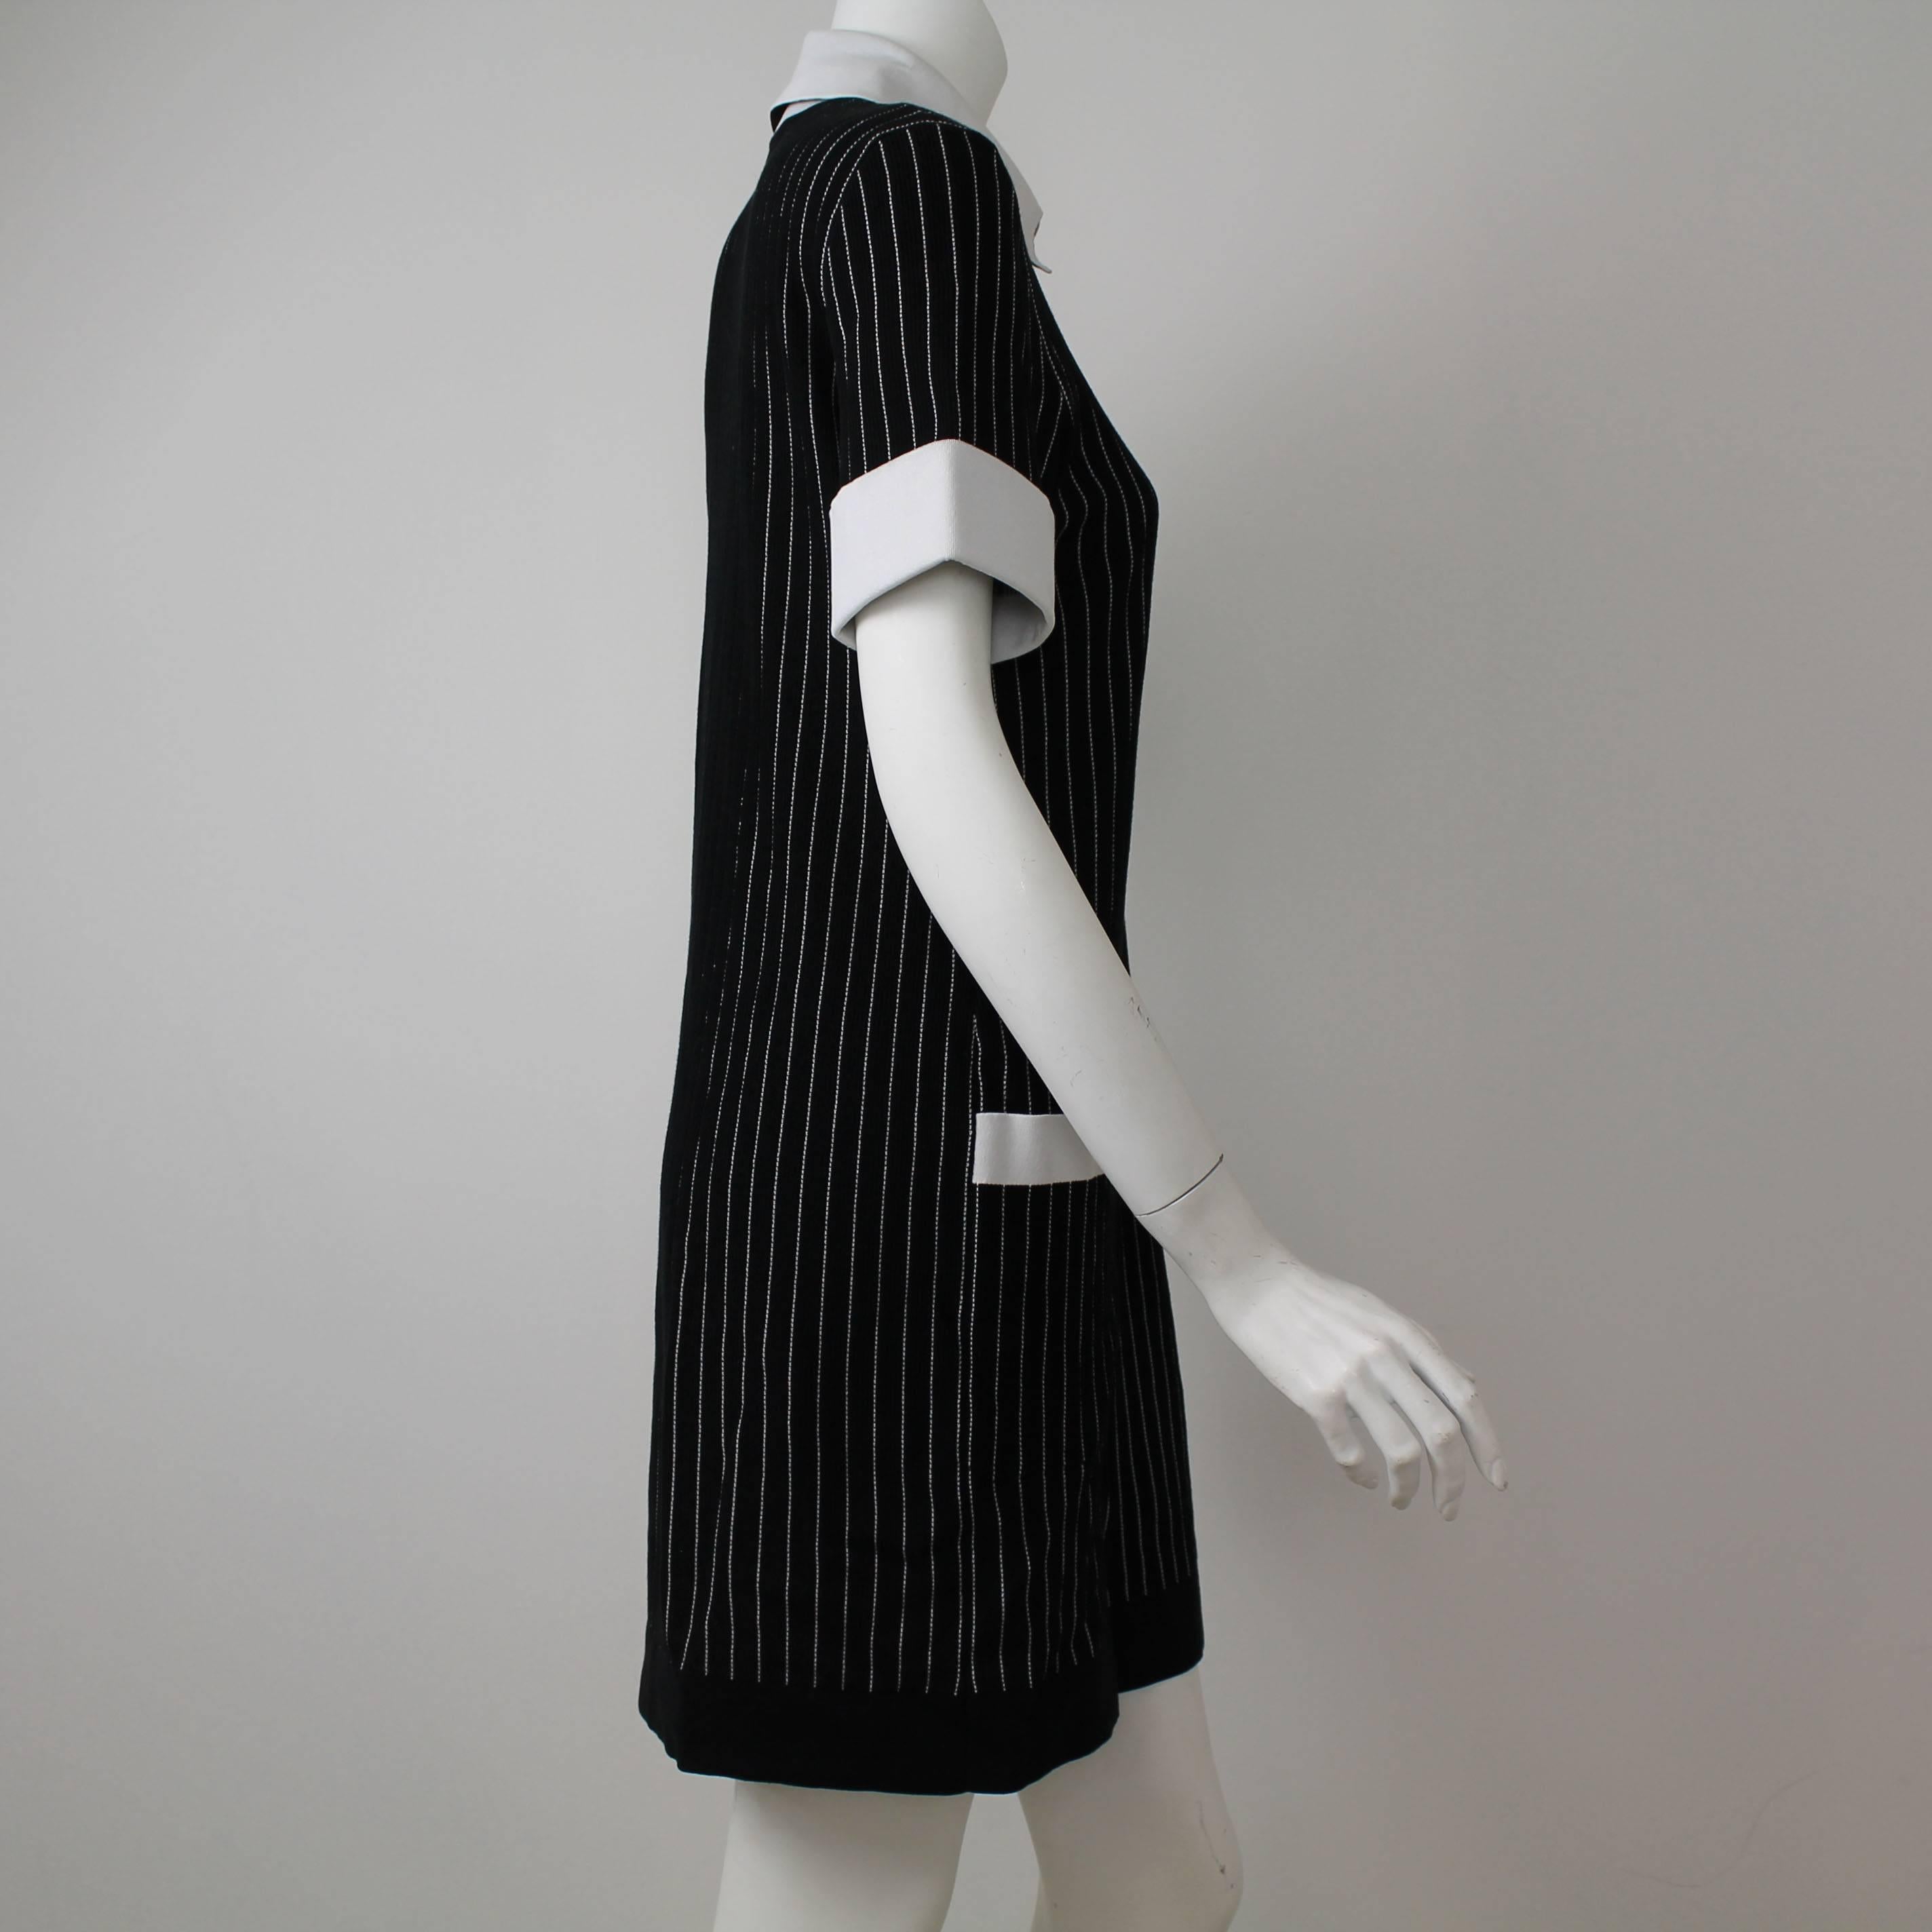 chanel black dress with white collar